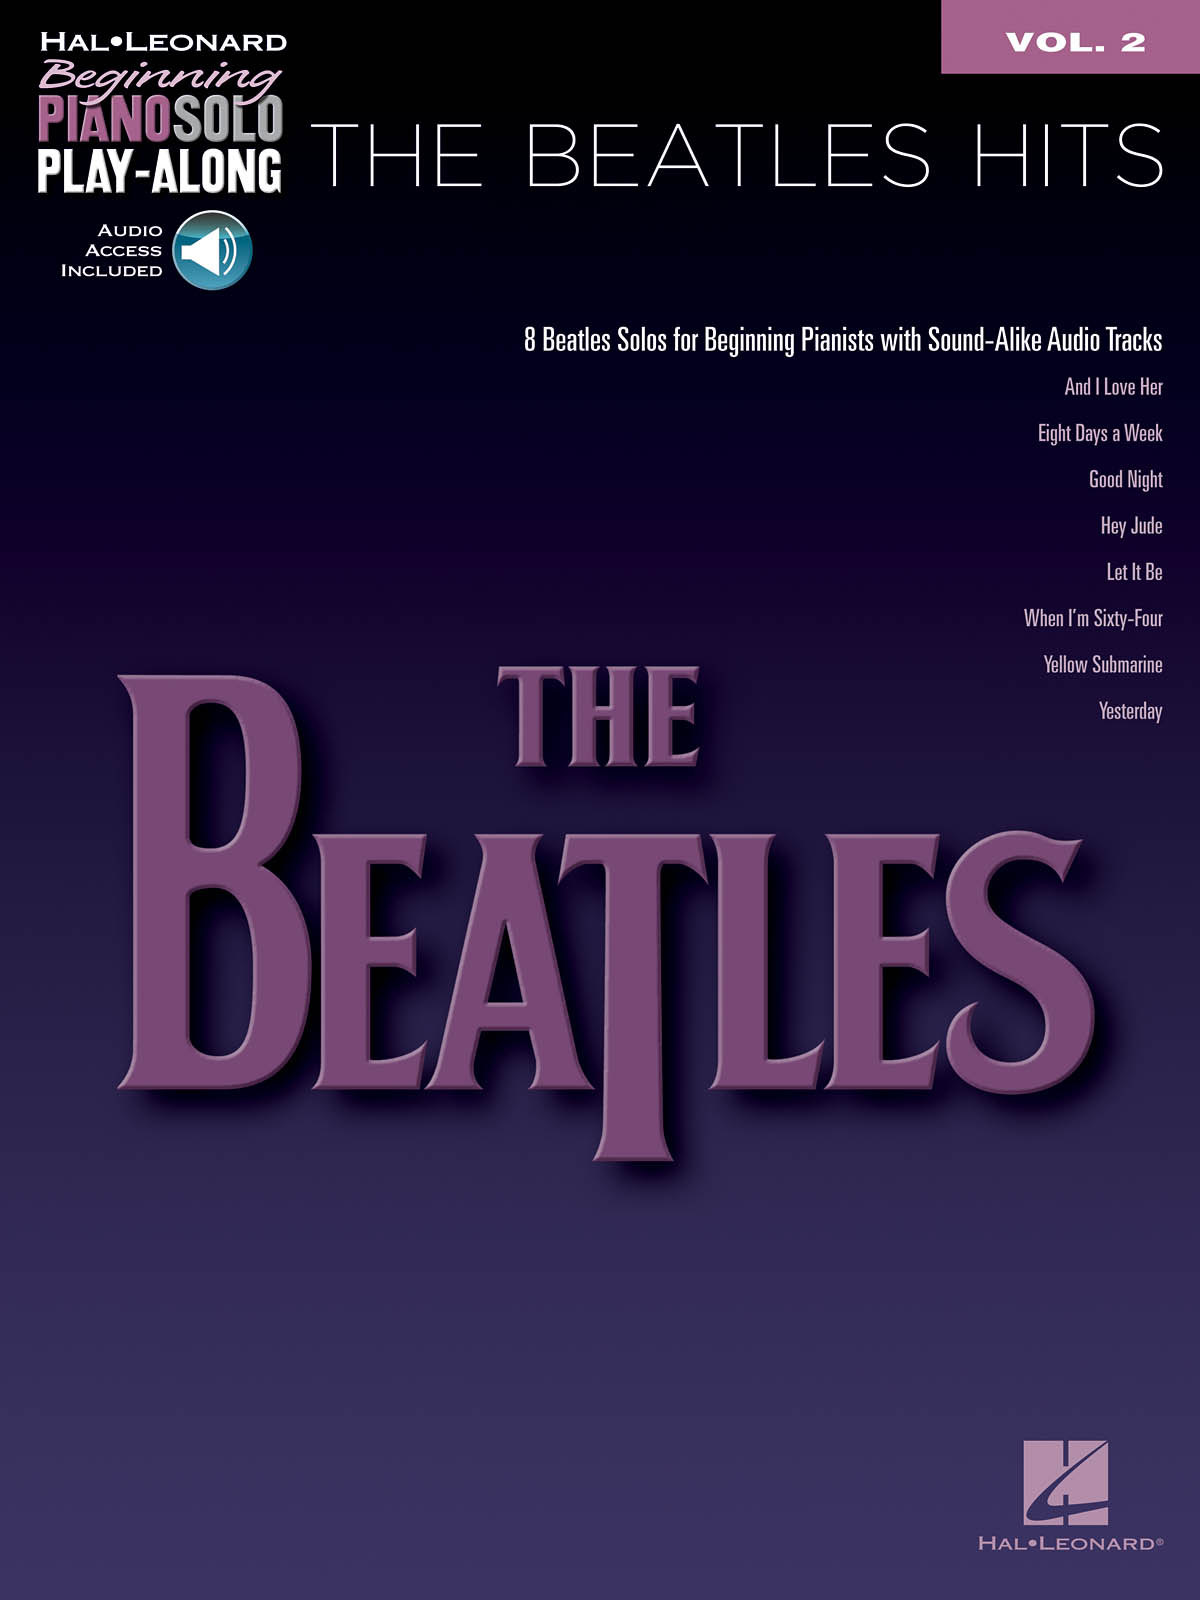 The Beatles Hits - Beginning Piano Solo Play-Along Volume 2